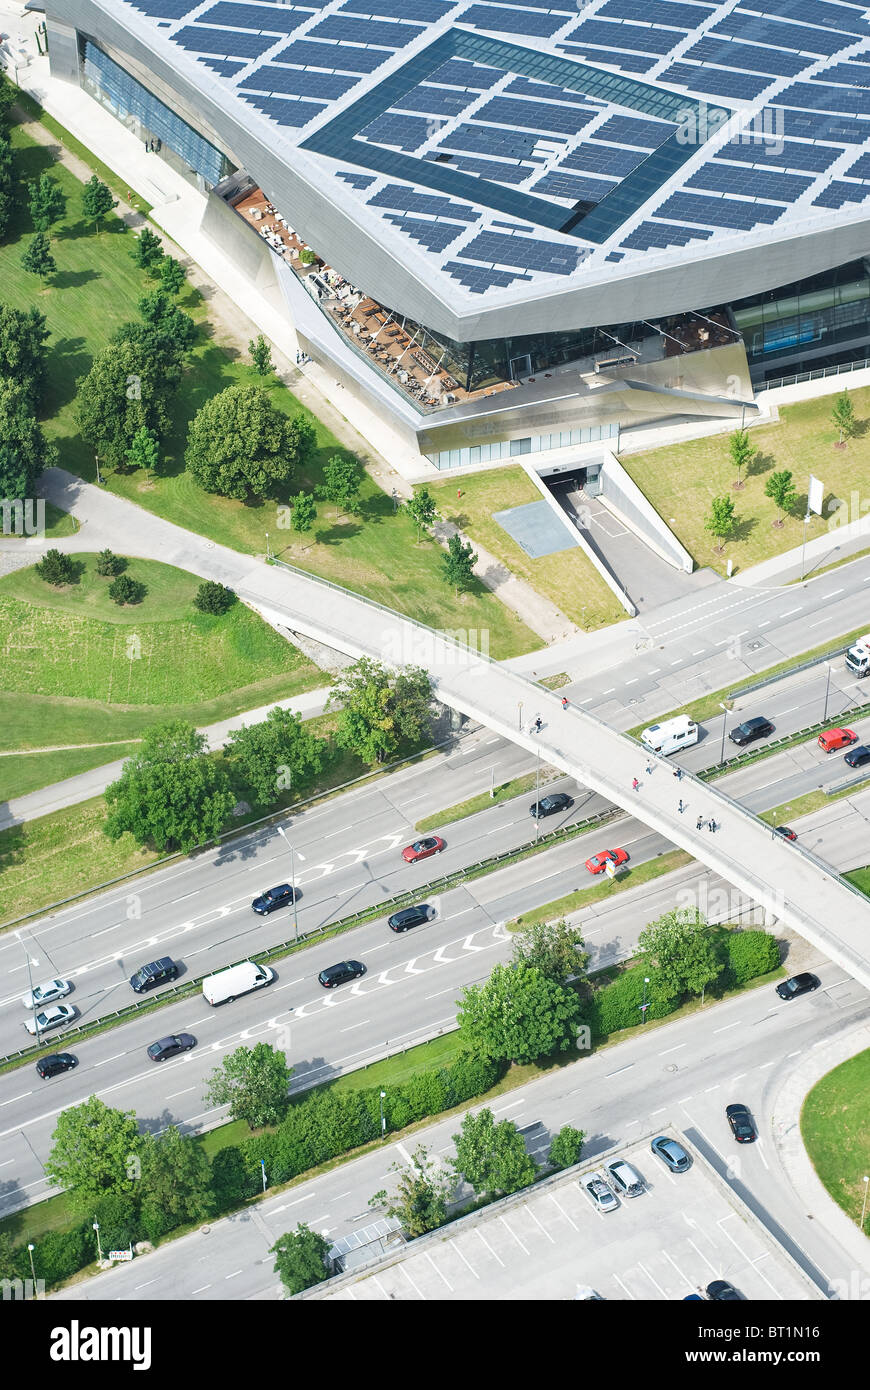 Aerial View of Highway with Pedestrian Bridge Stock Photo